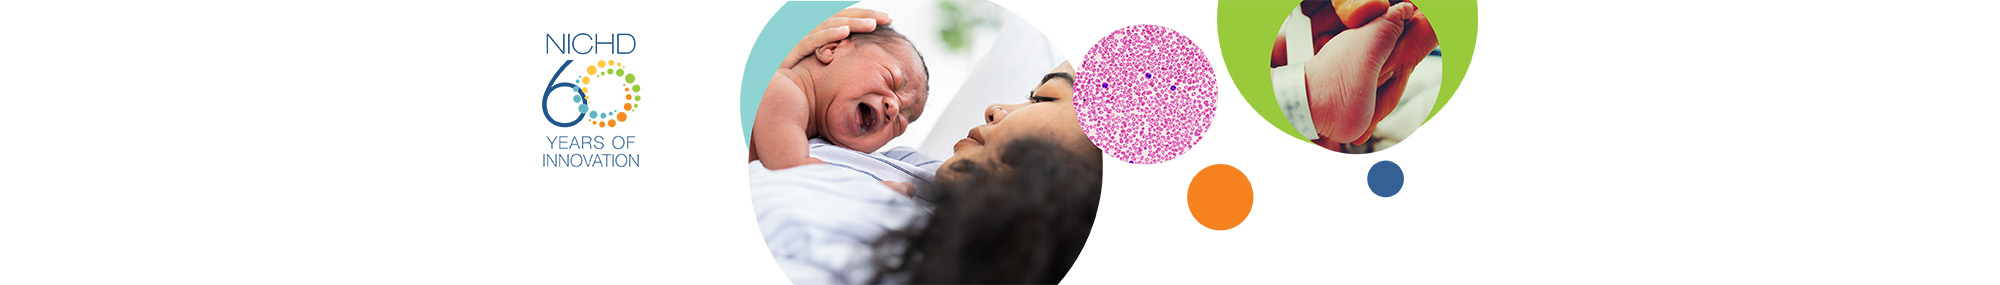 A series of three images related to infant screenings including: a mother with a crying child on her chest (left), a microscopic image of red blood cells in a blood smear (middle), and a baby’s foot with a medical bracelet around the ankle (right) all alongside the NICHD 60 years logo.